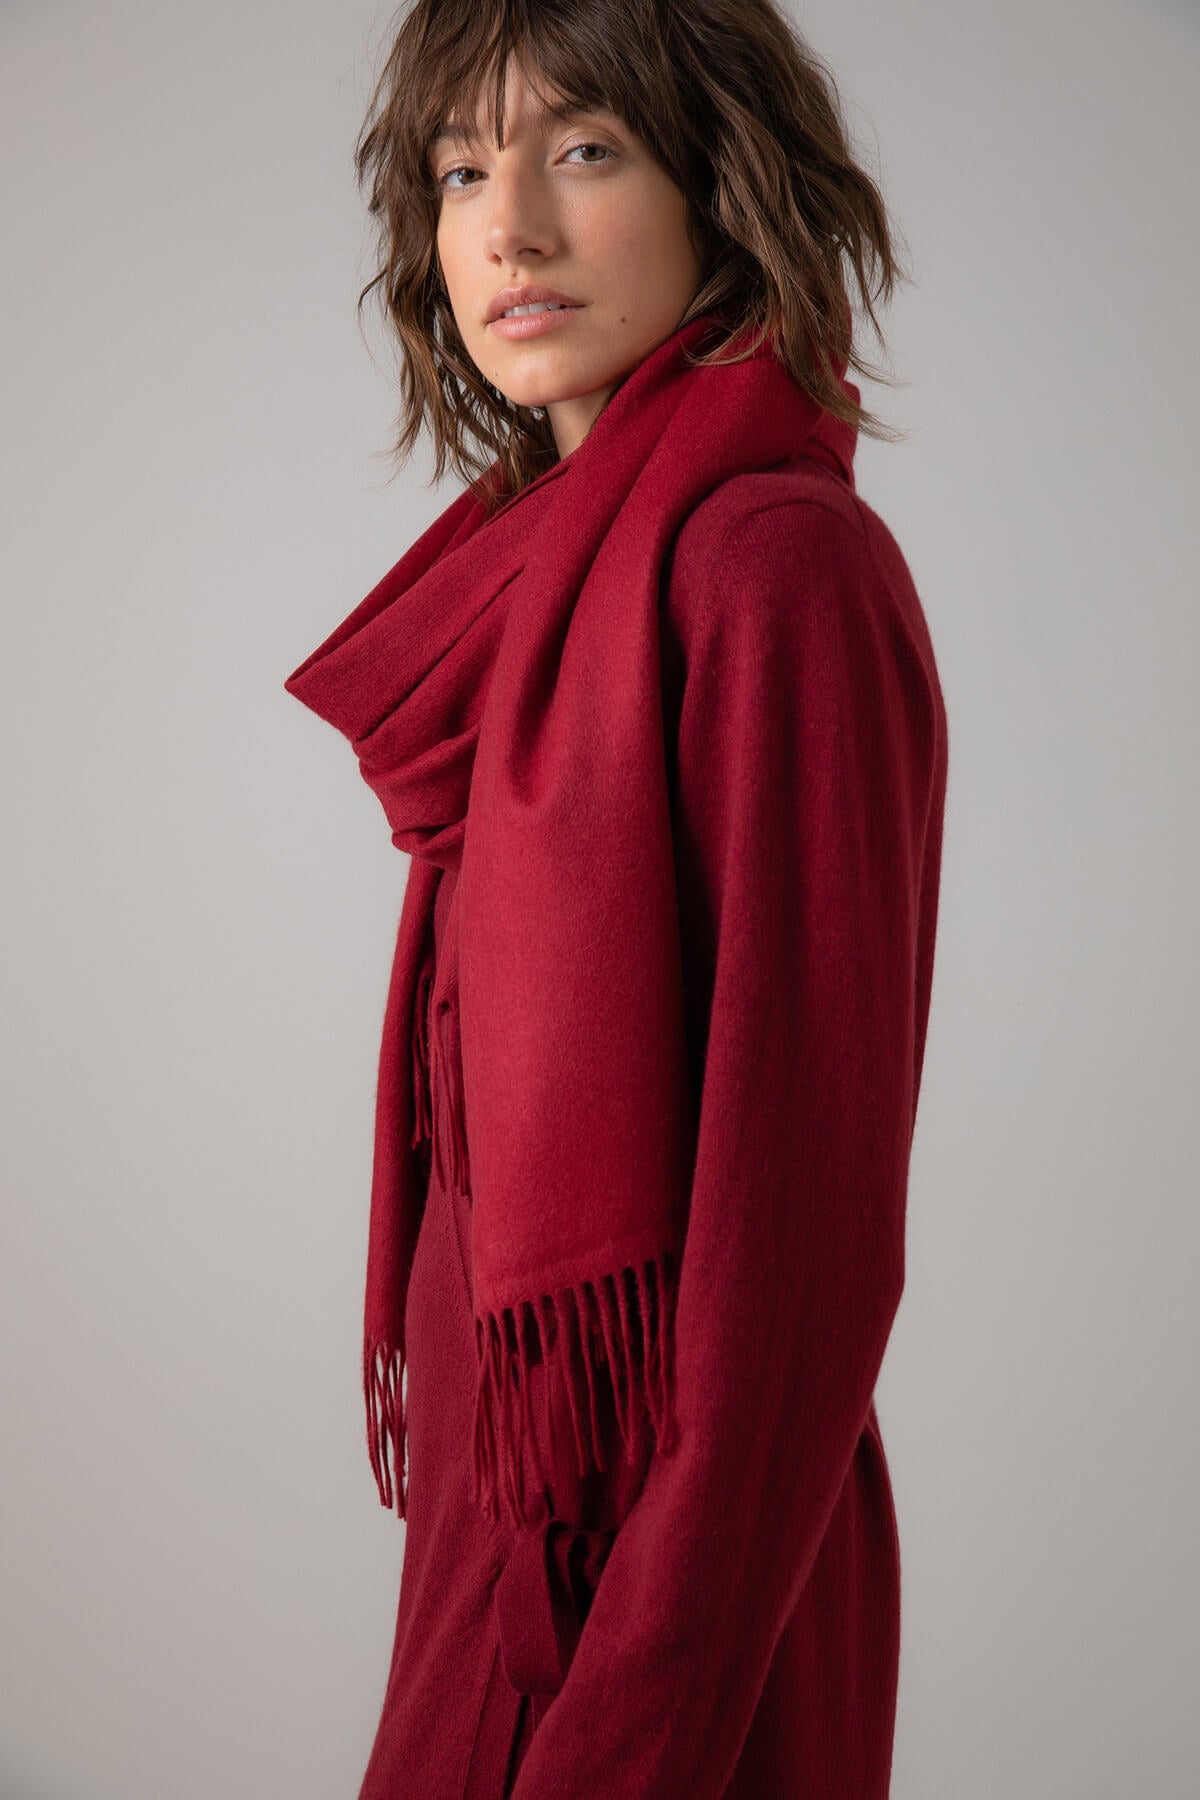 Model wearing Johnstons of Elgin 100% Cashmere Stole in Merlot on a grey background WA000056SE7234N/A